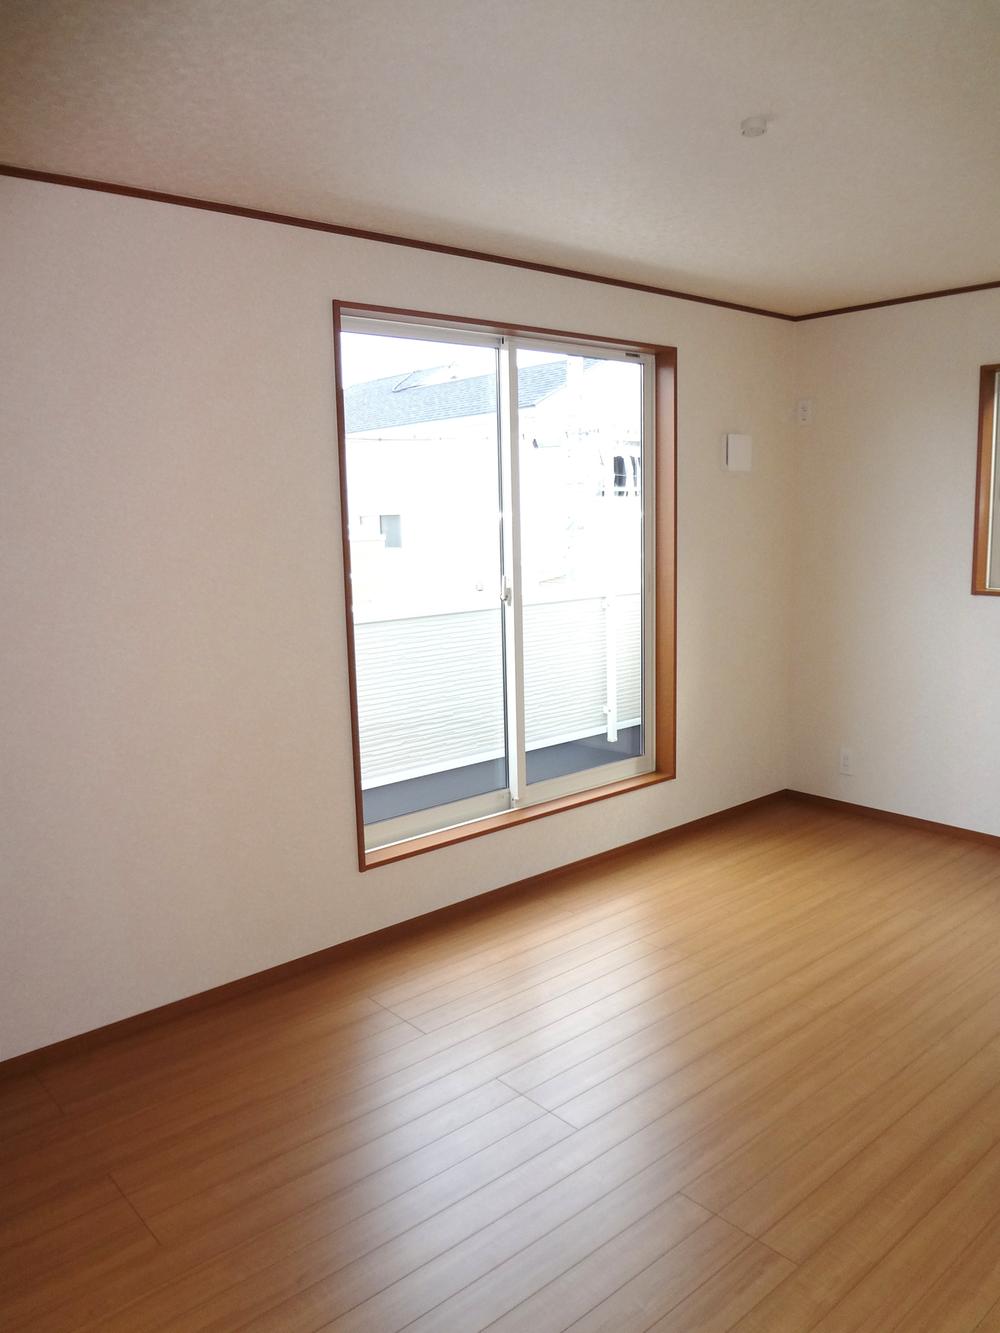 Non-living room. It is a photograph of the second floor Western-style.